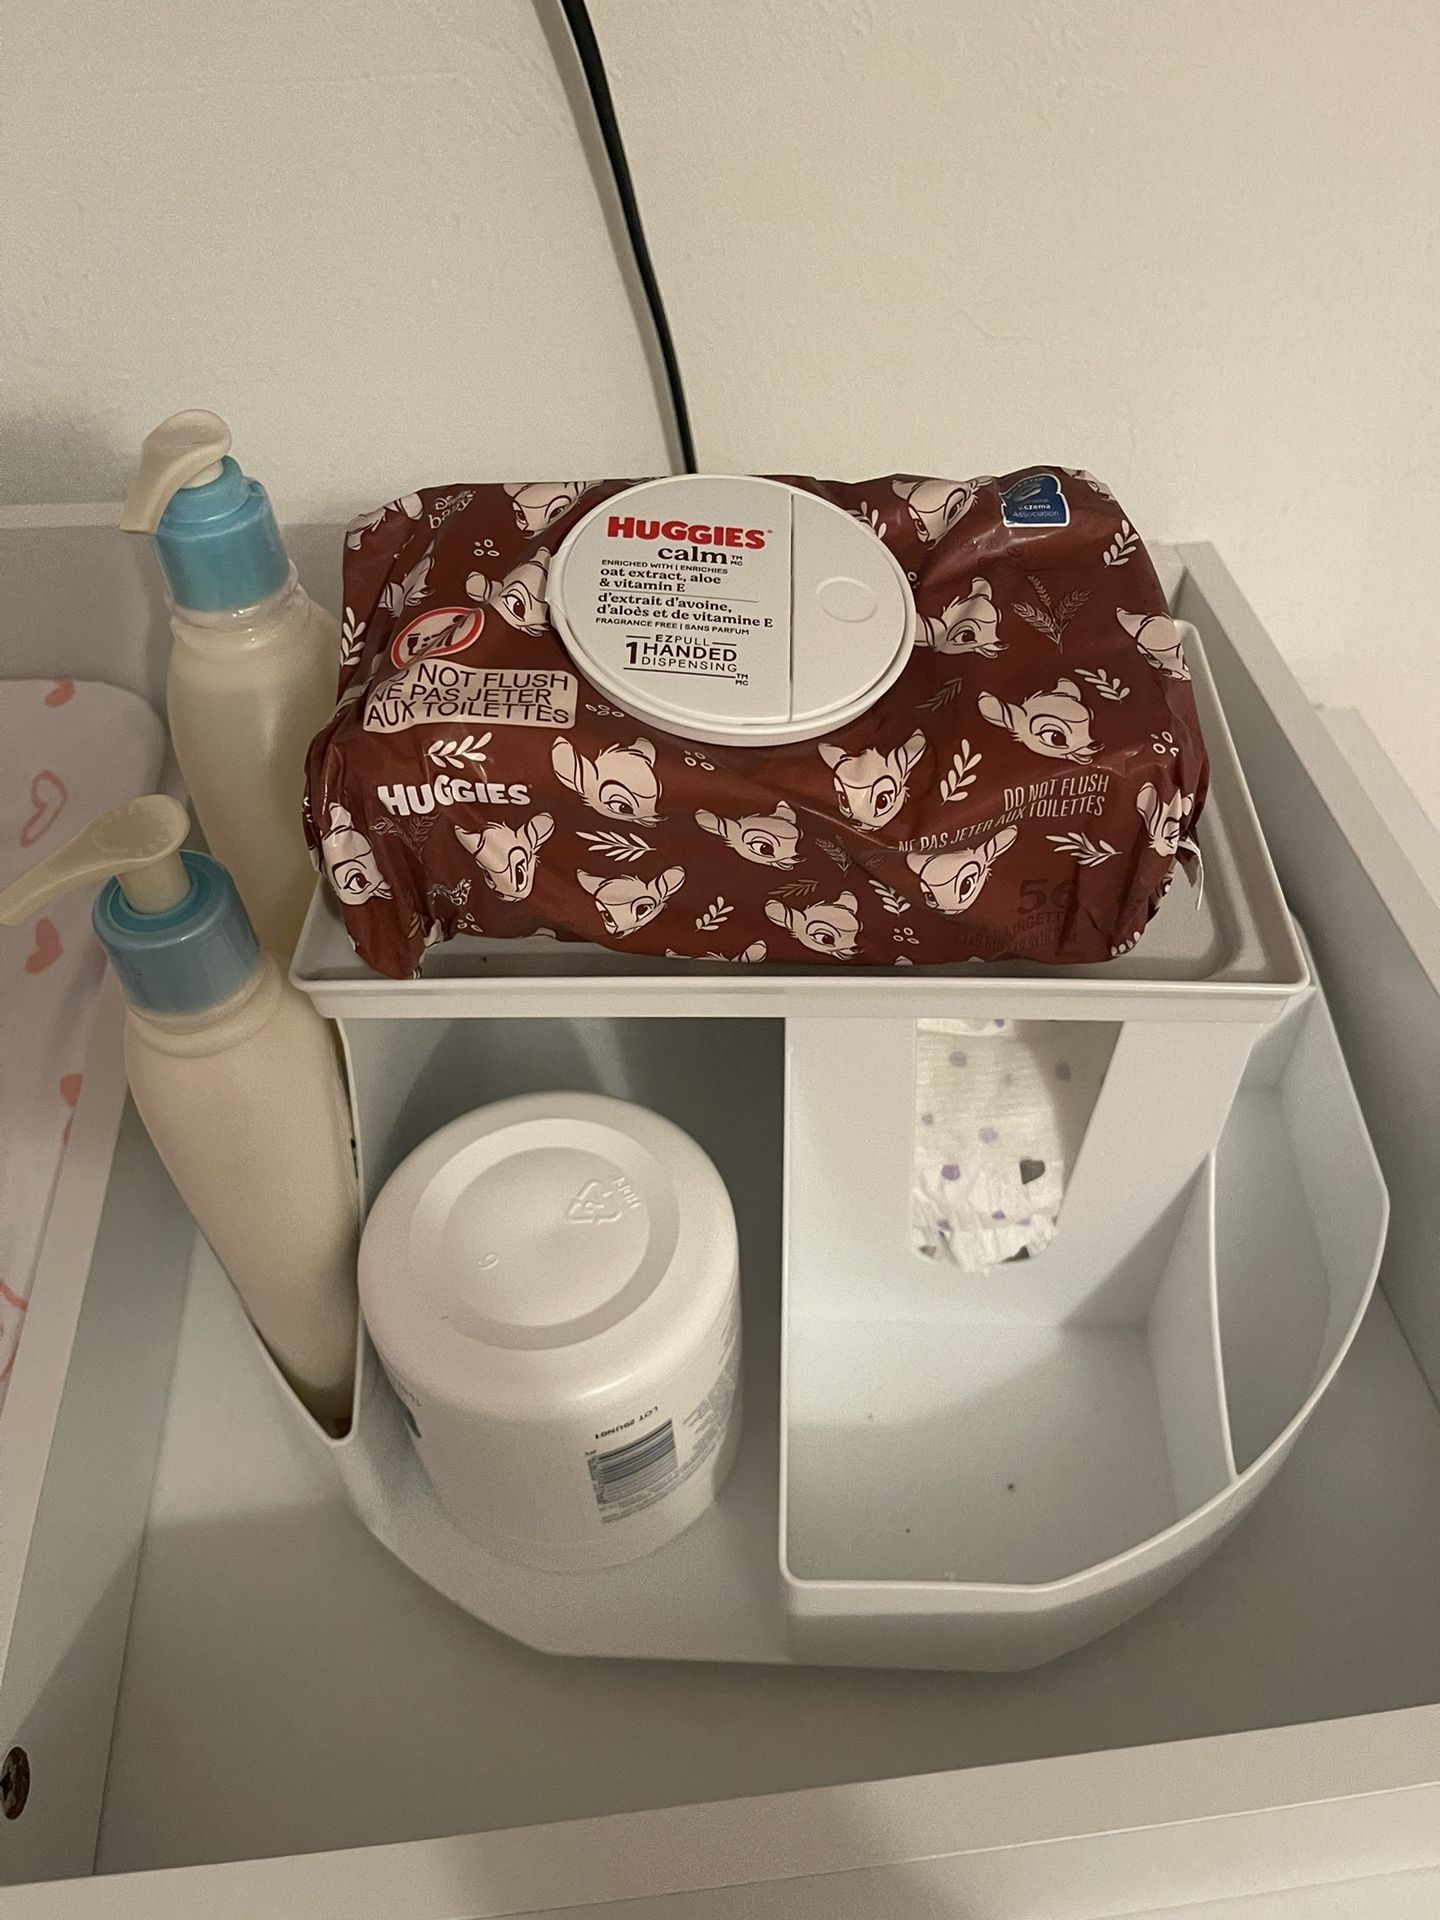 ALMOST *BRAND NEW*!! Dexbaby The Spin Changing Station: Nursery Organizer/Diaper Cady (IT SPINS!)